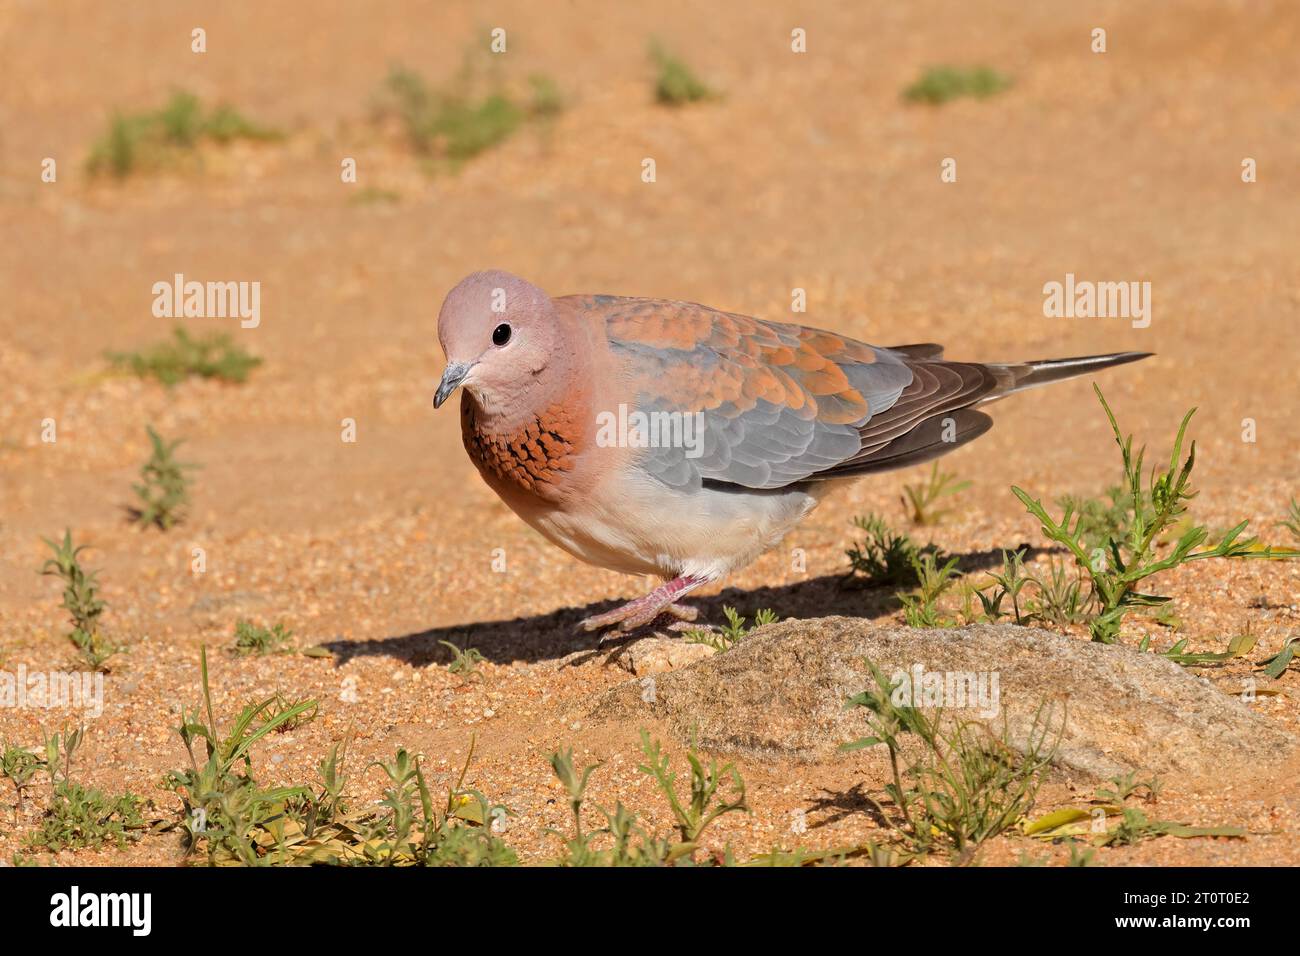 A laughing dove (Spilopelia senegalensis) in natural habitat, South Africa Stock Photo